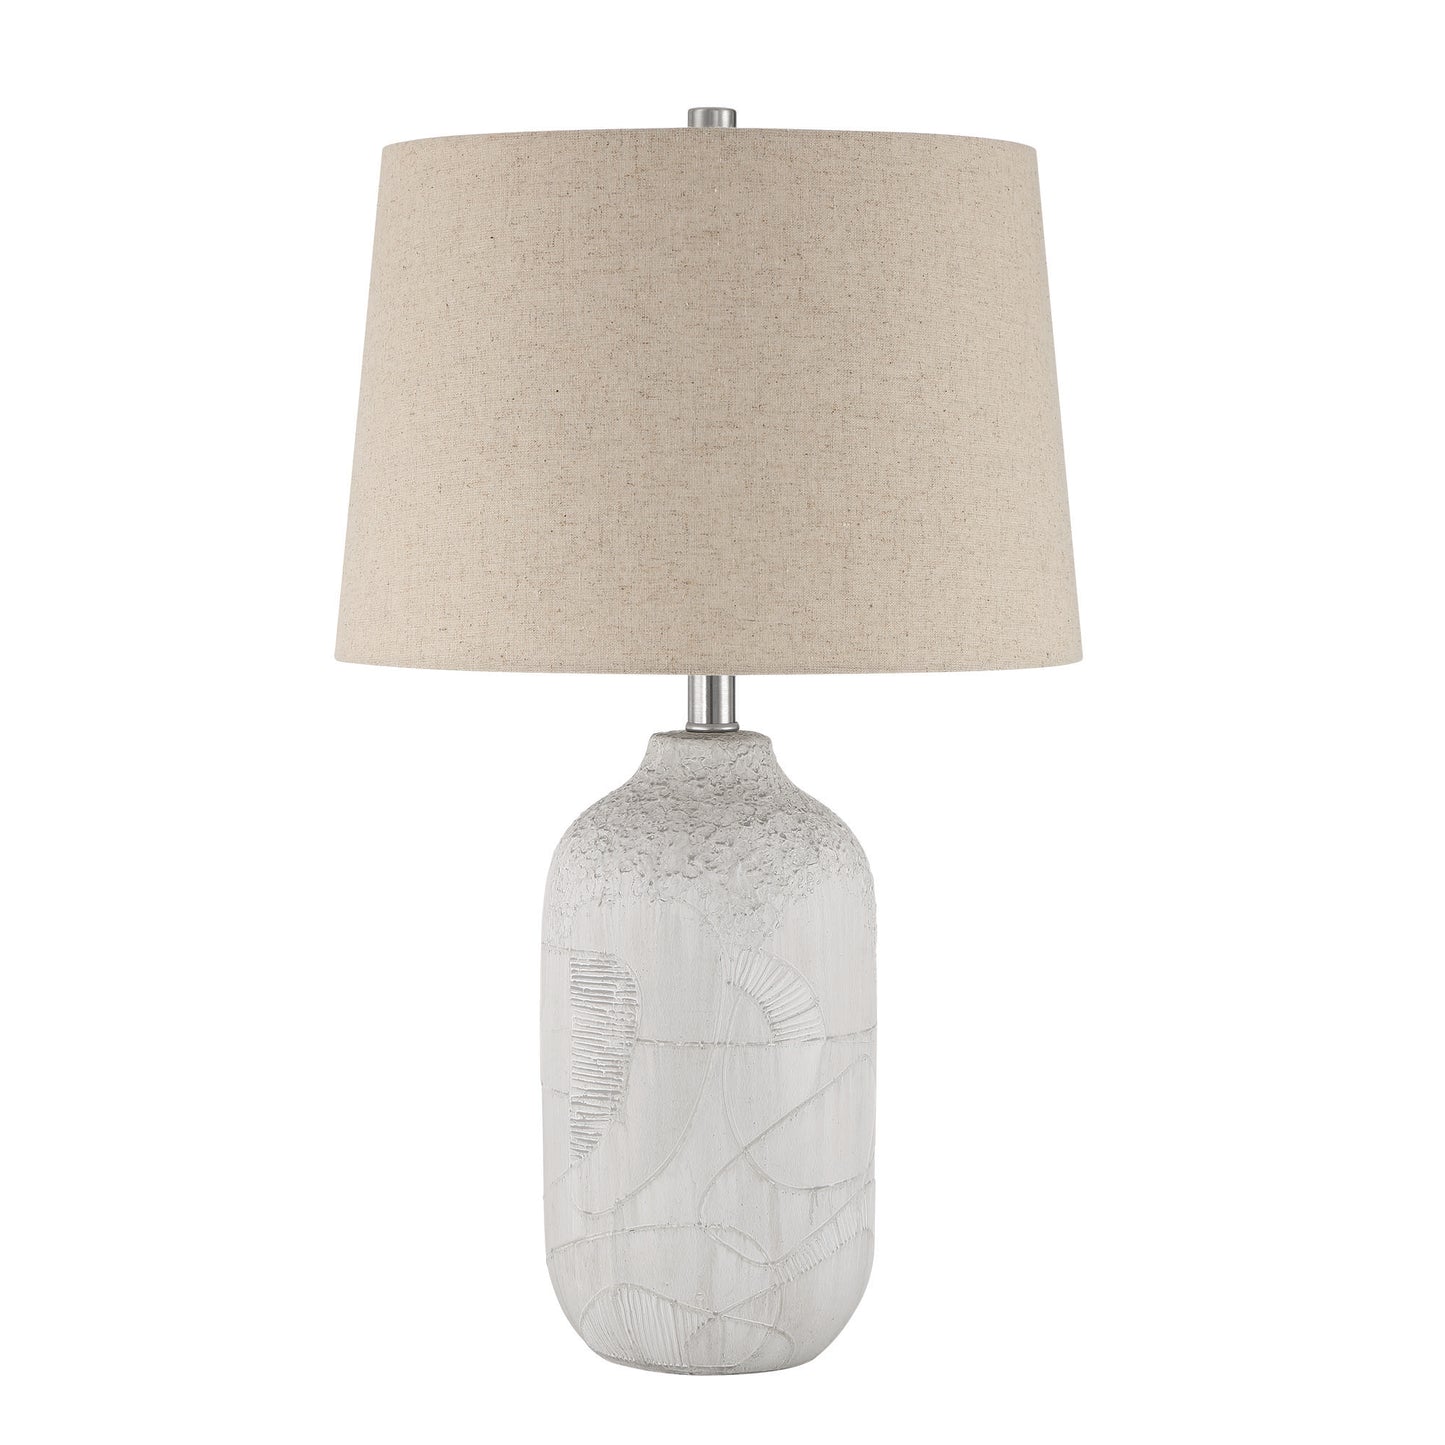 1 light linen ceramic table lamp set of 2 (1) by ACROMA